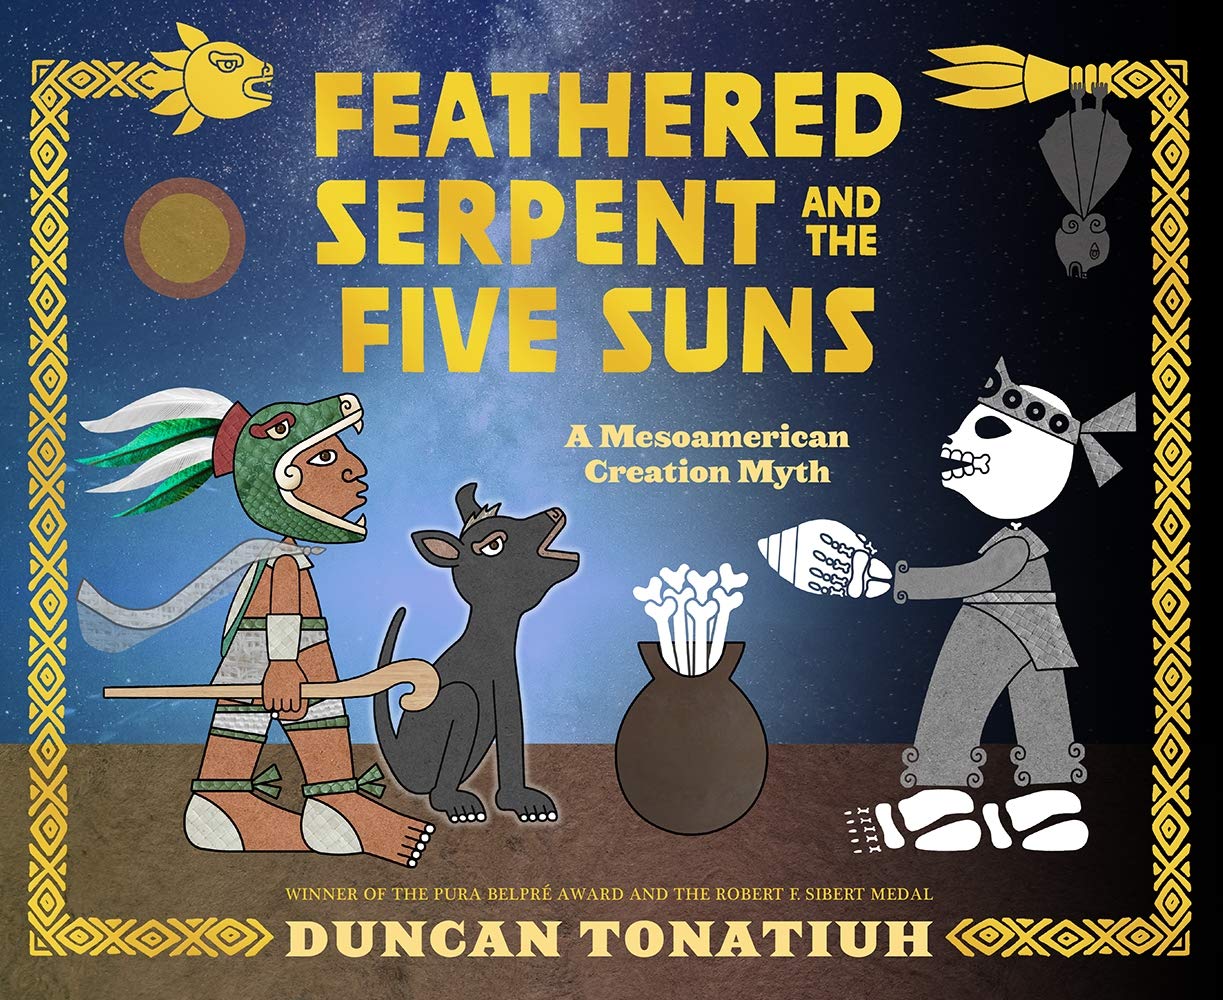 book cover for "feathered serpent and the five suns"